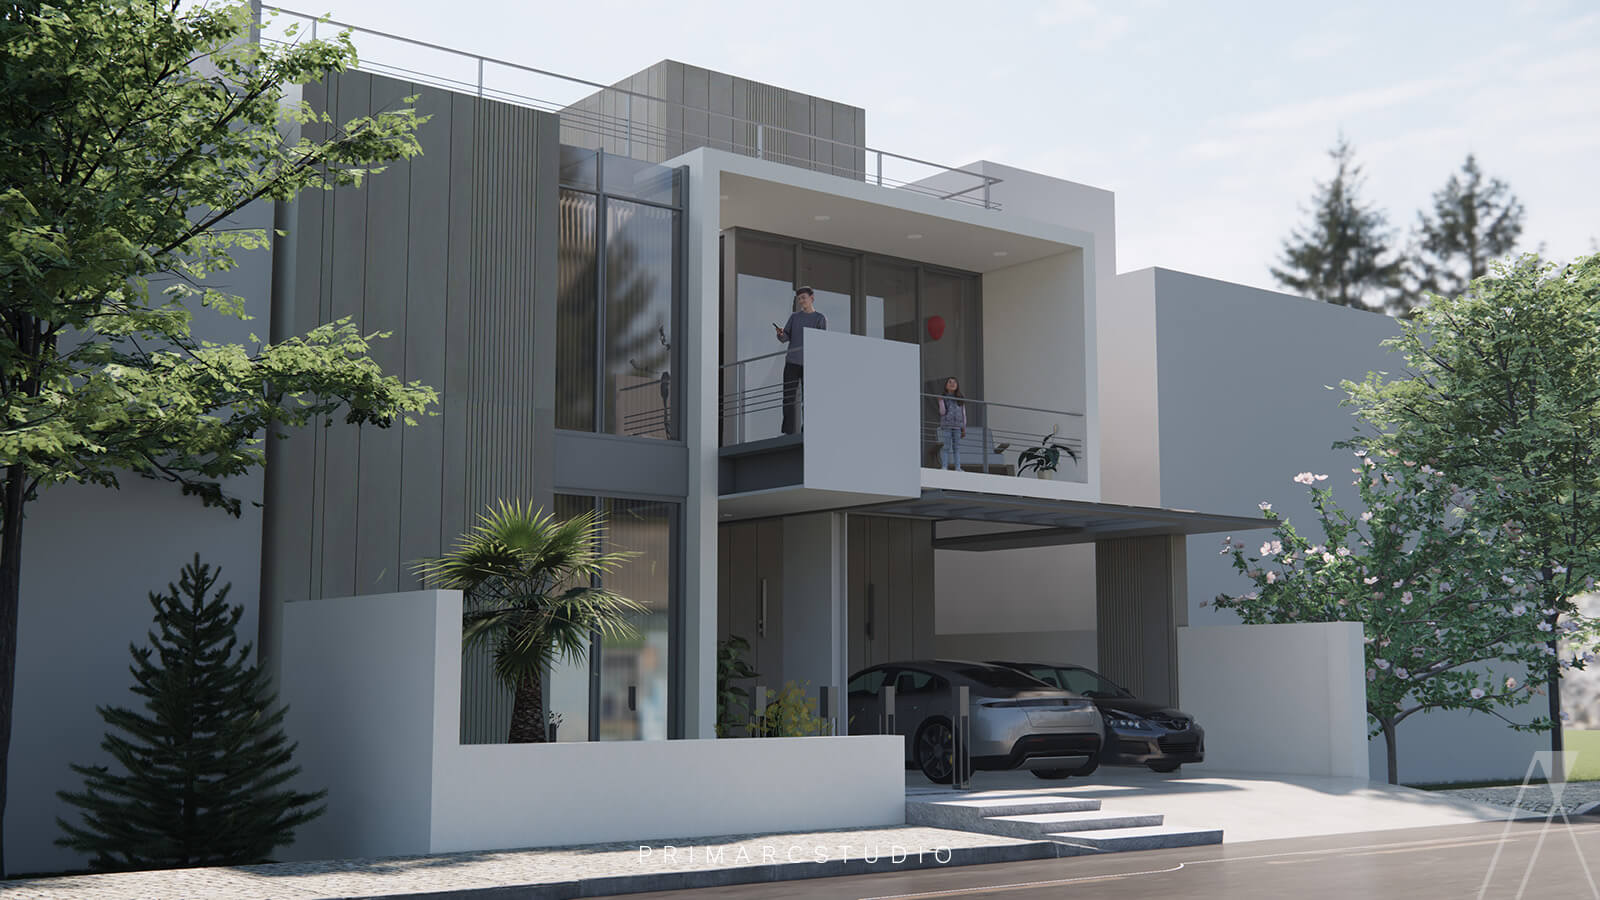 House elevation modern design with white and grey tones used in exterior.